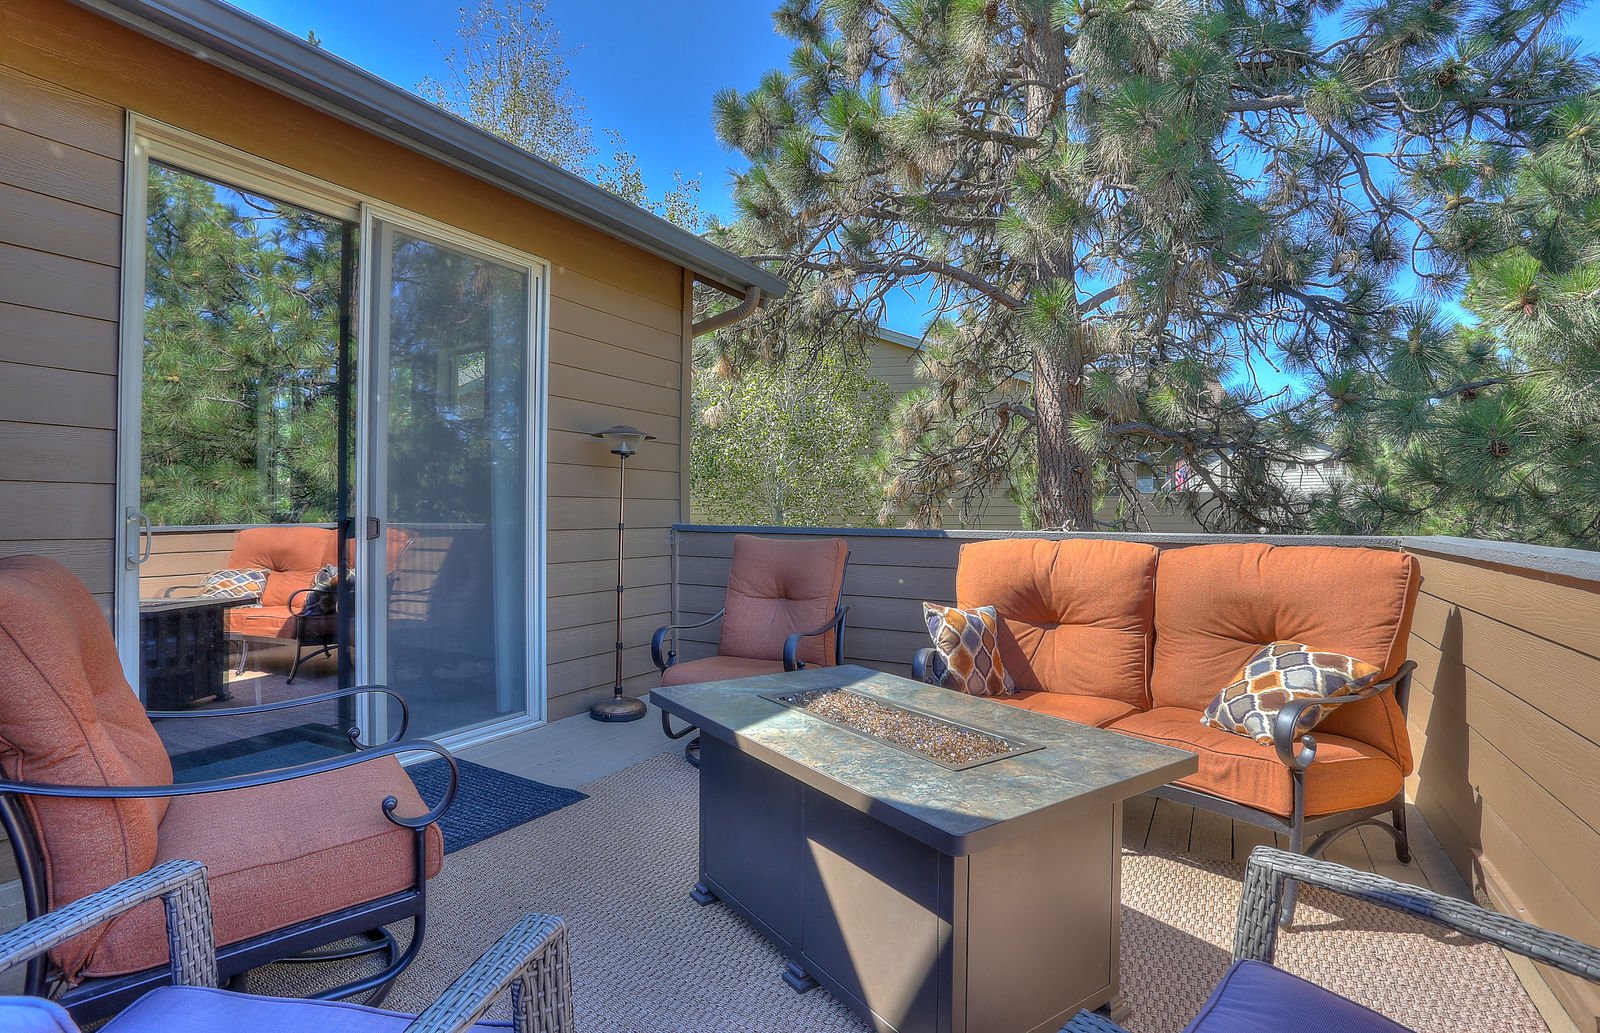 The outdoor living space of this Bend rental property